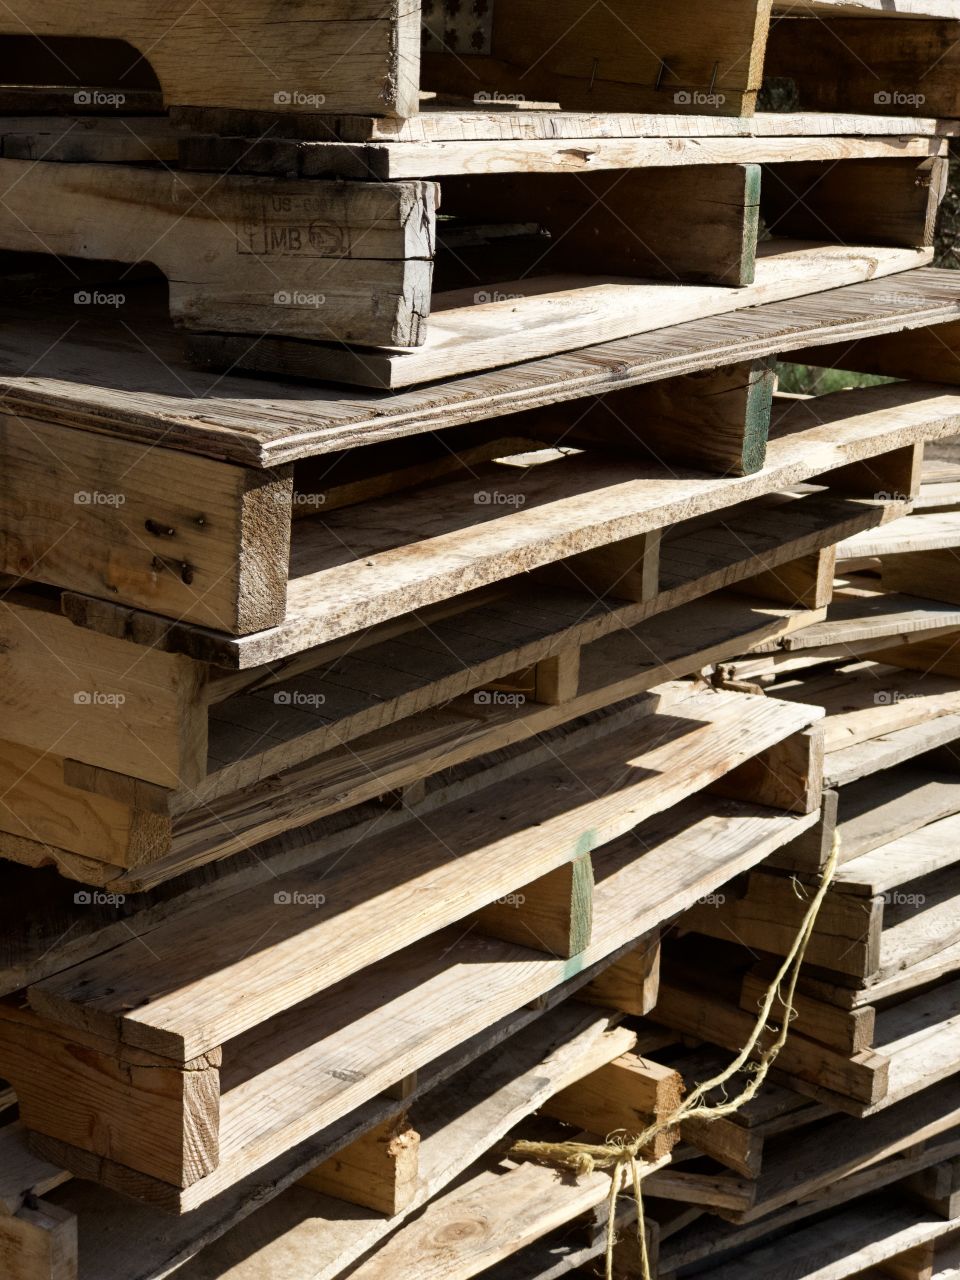 Stacks of wooden pallets waiting for use. 